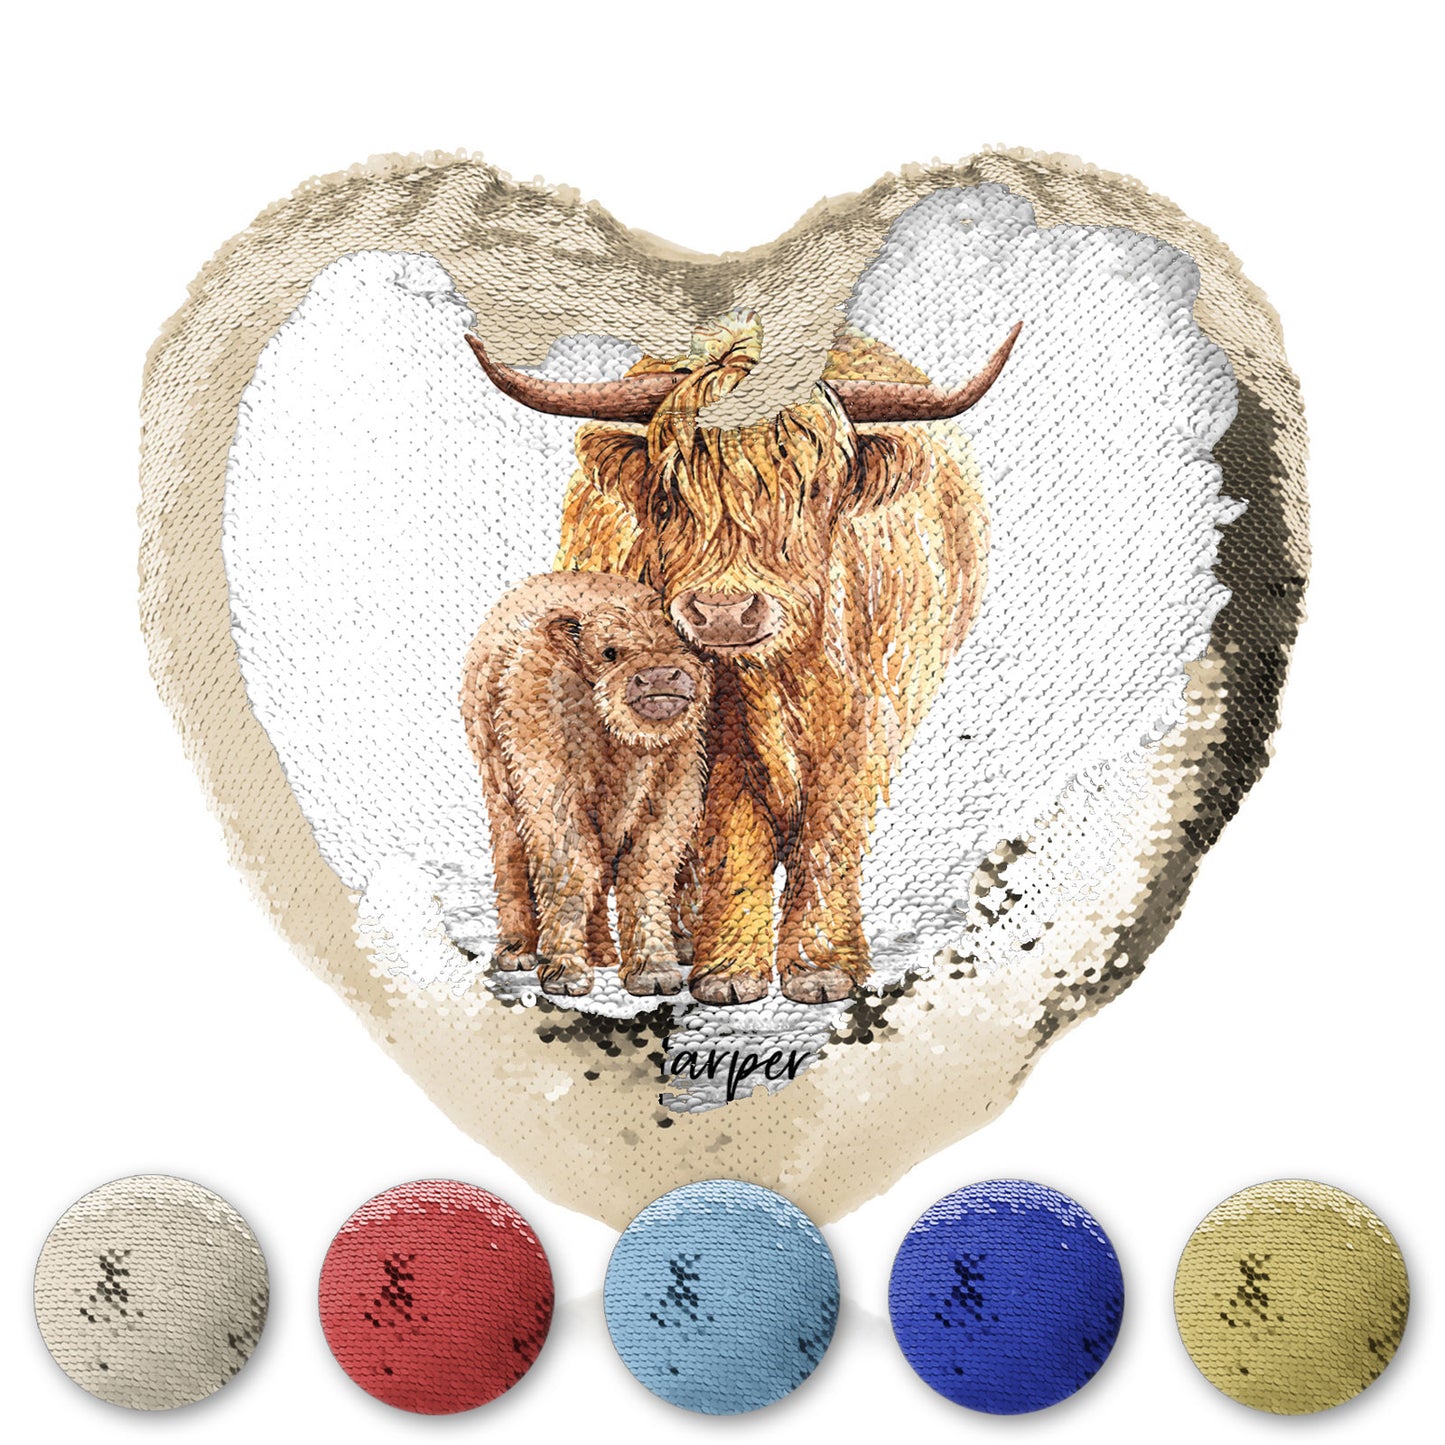 Personalised Sequin Heart Cushion with Welcoming Text and Relaxing Mum and Baby Highland Cows